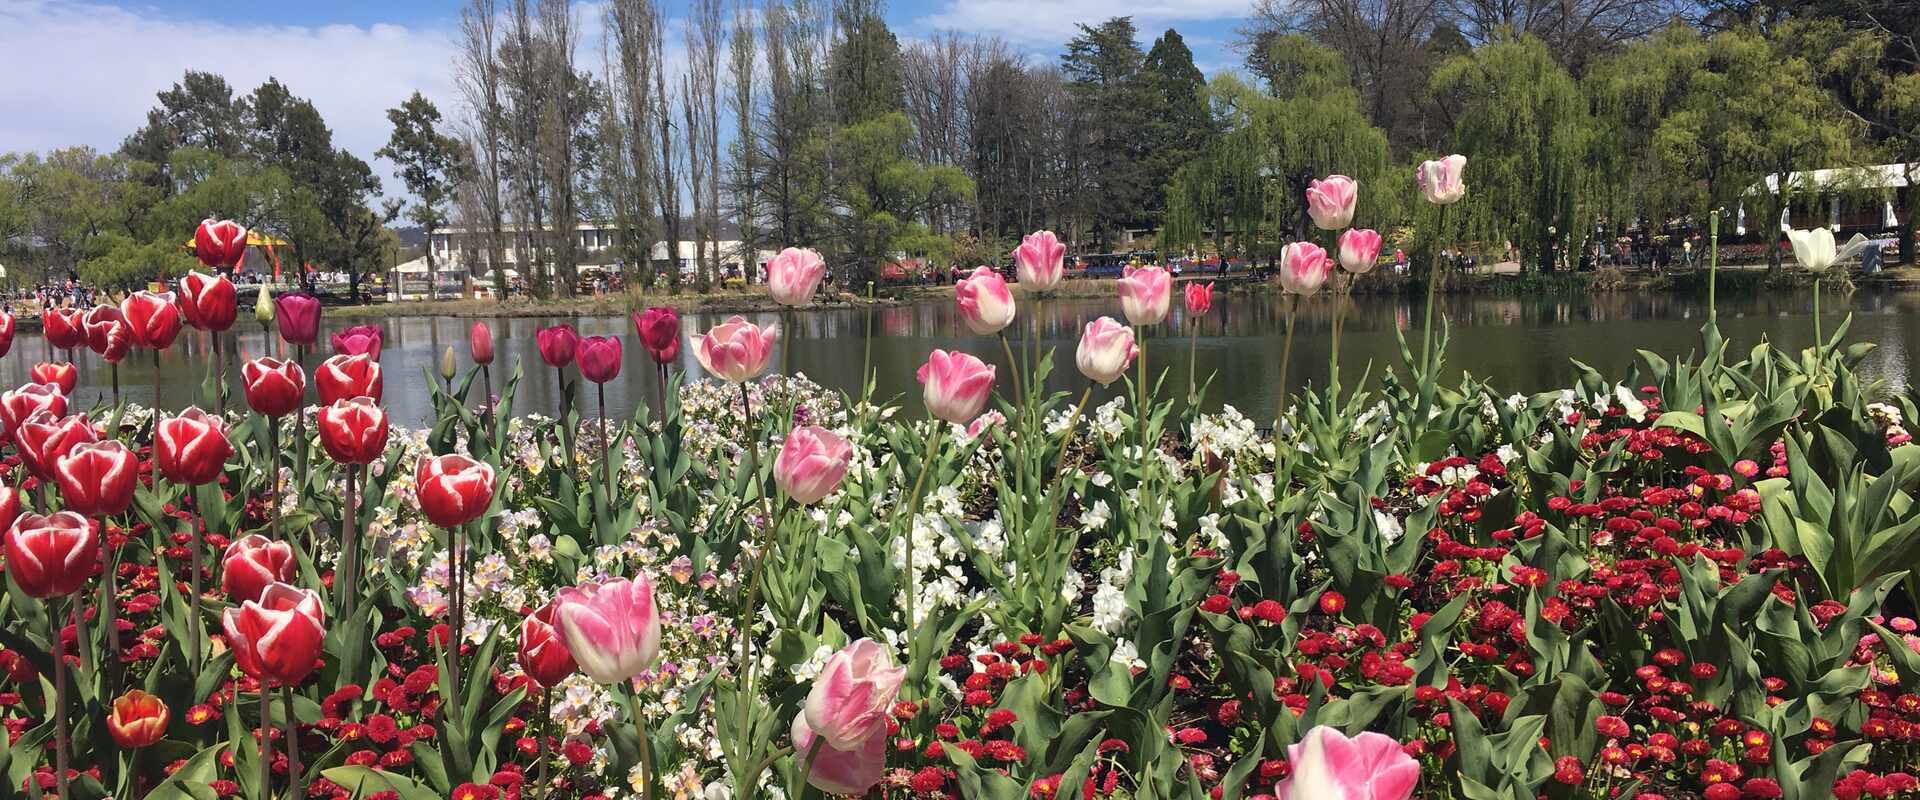 Image of Canberra Floriade